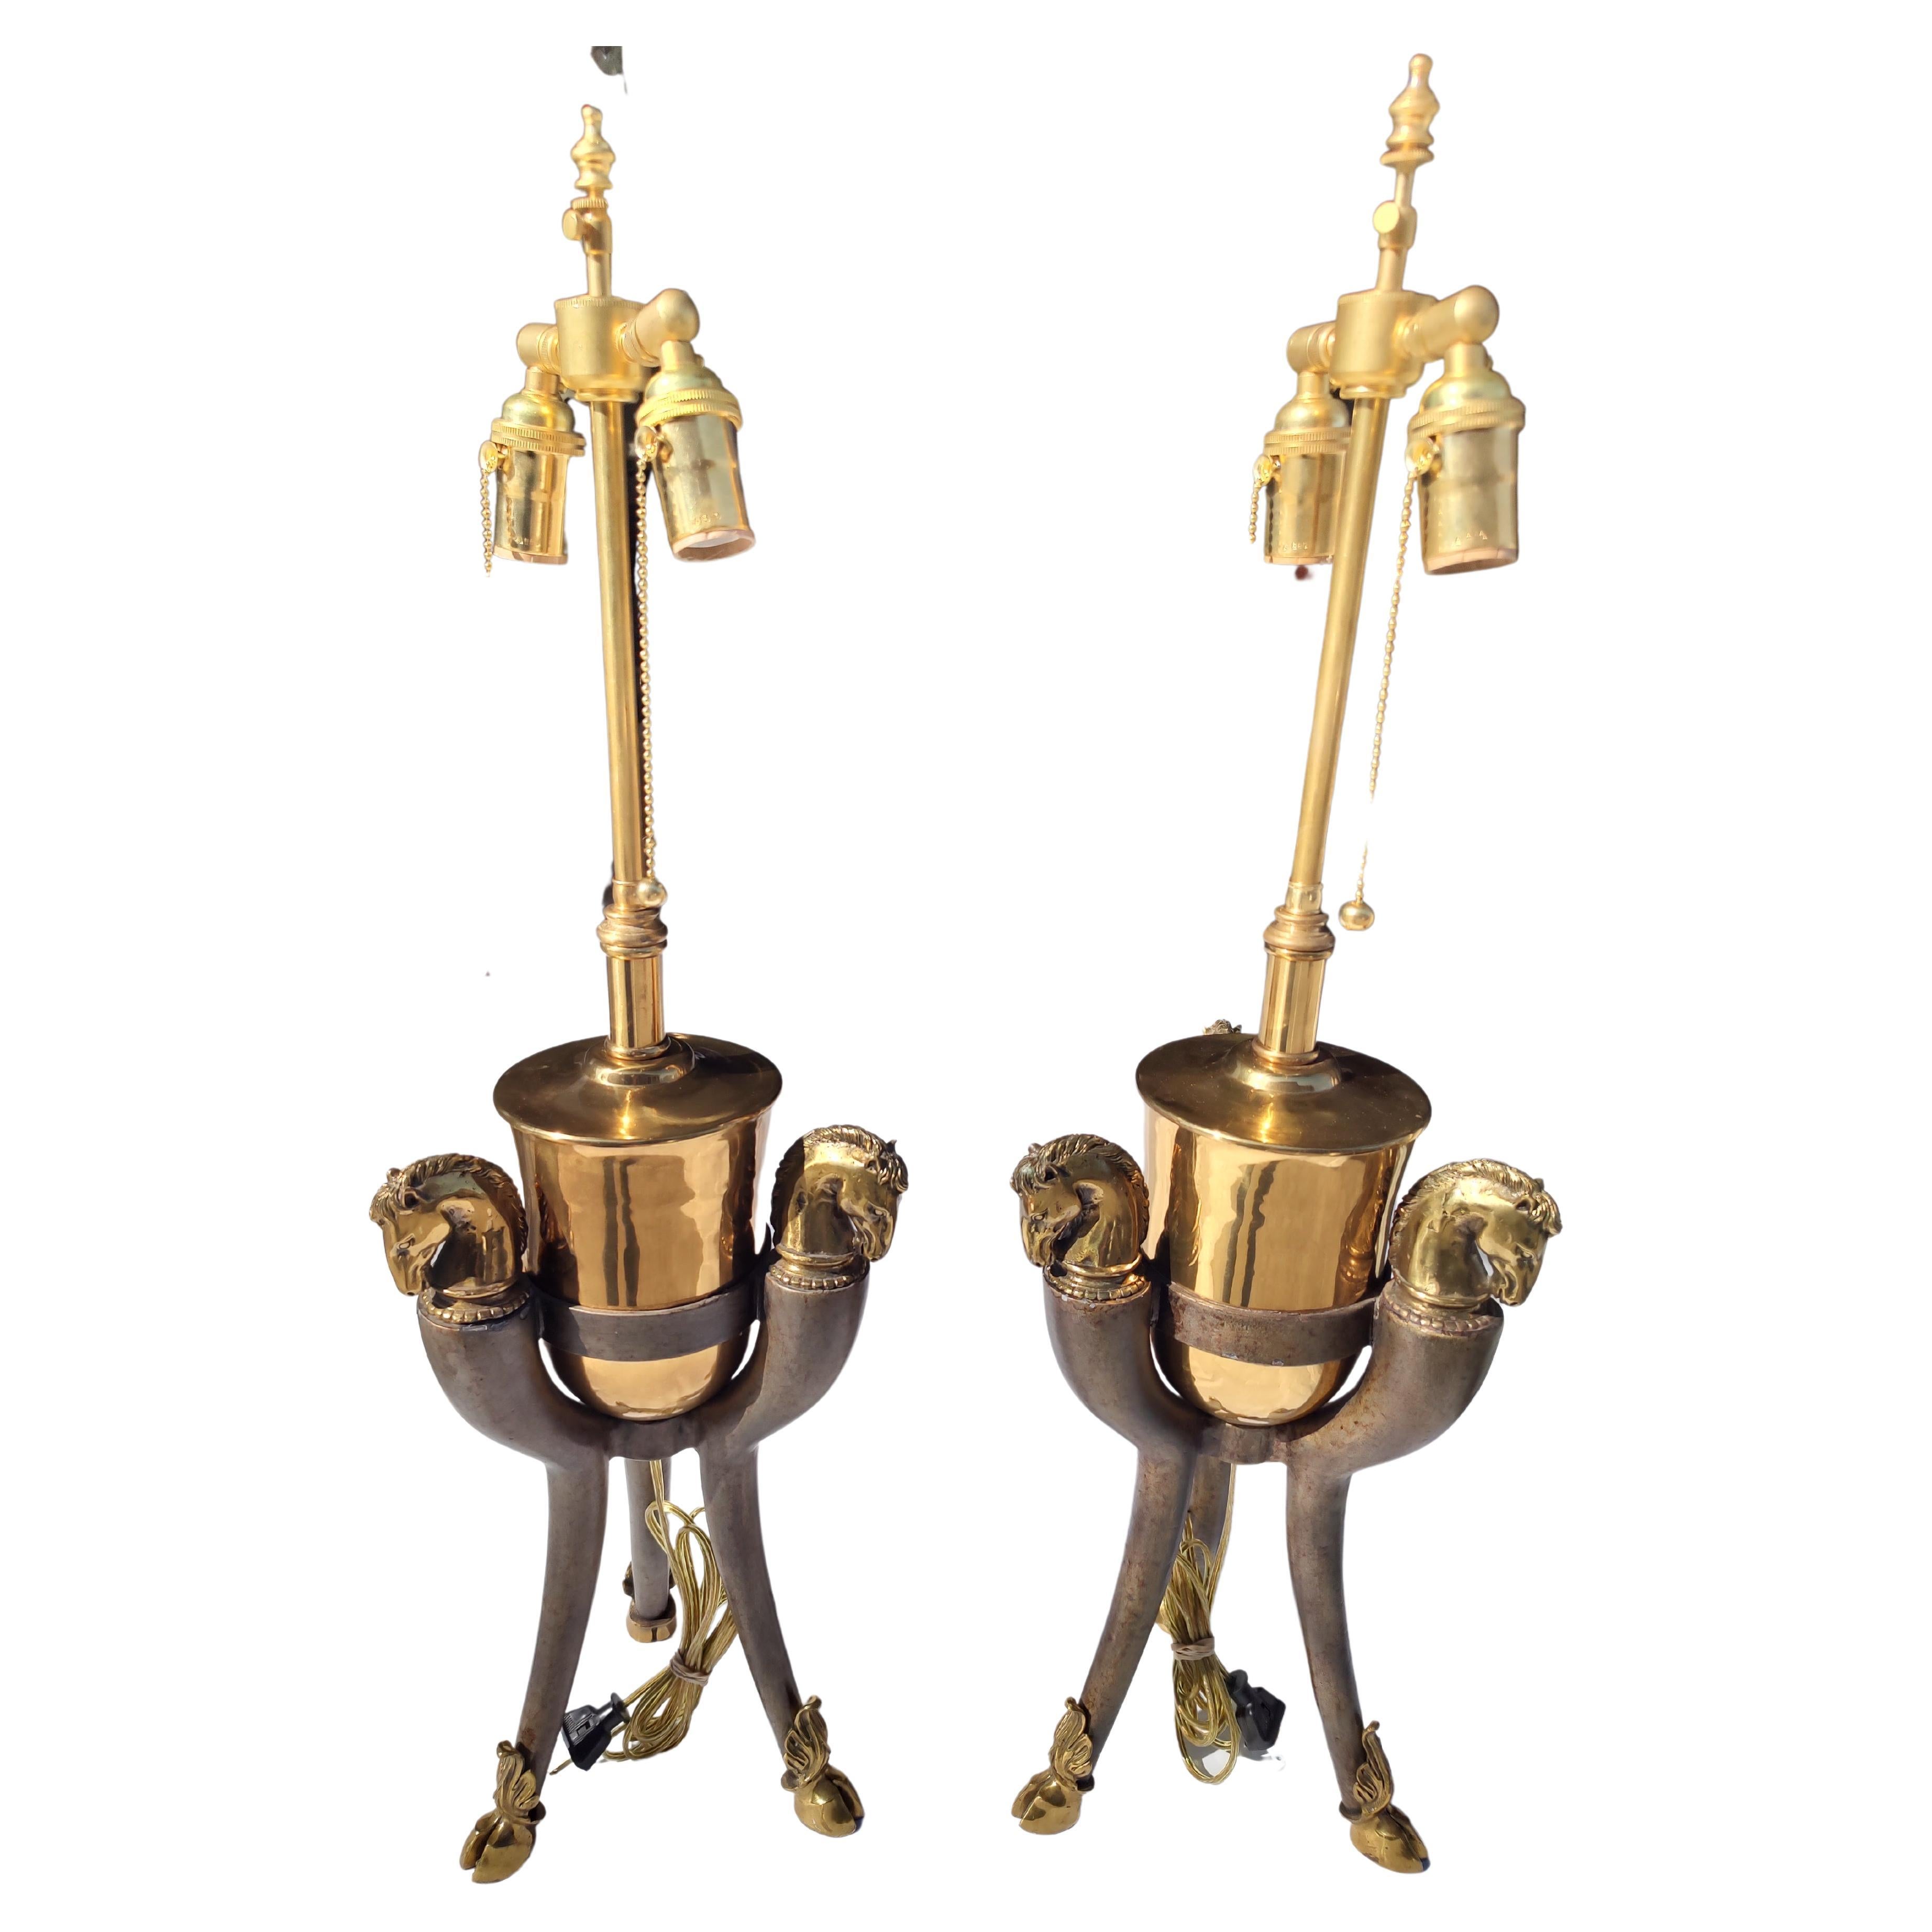 Pair of Mid-Century Modern Figural Table Lamps With Horse Heads - Maitland Smith